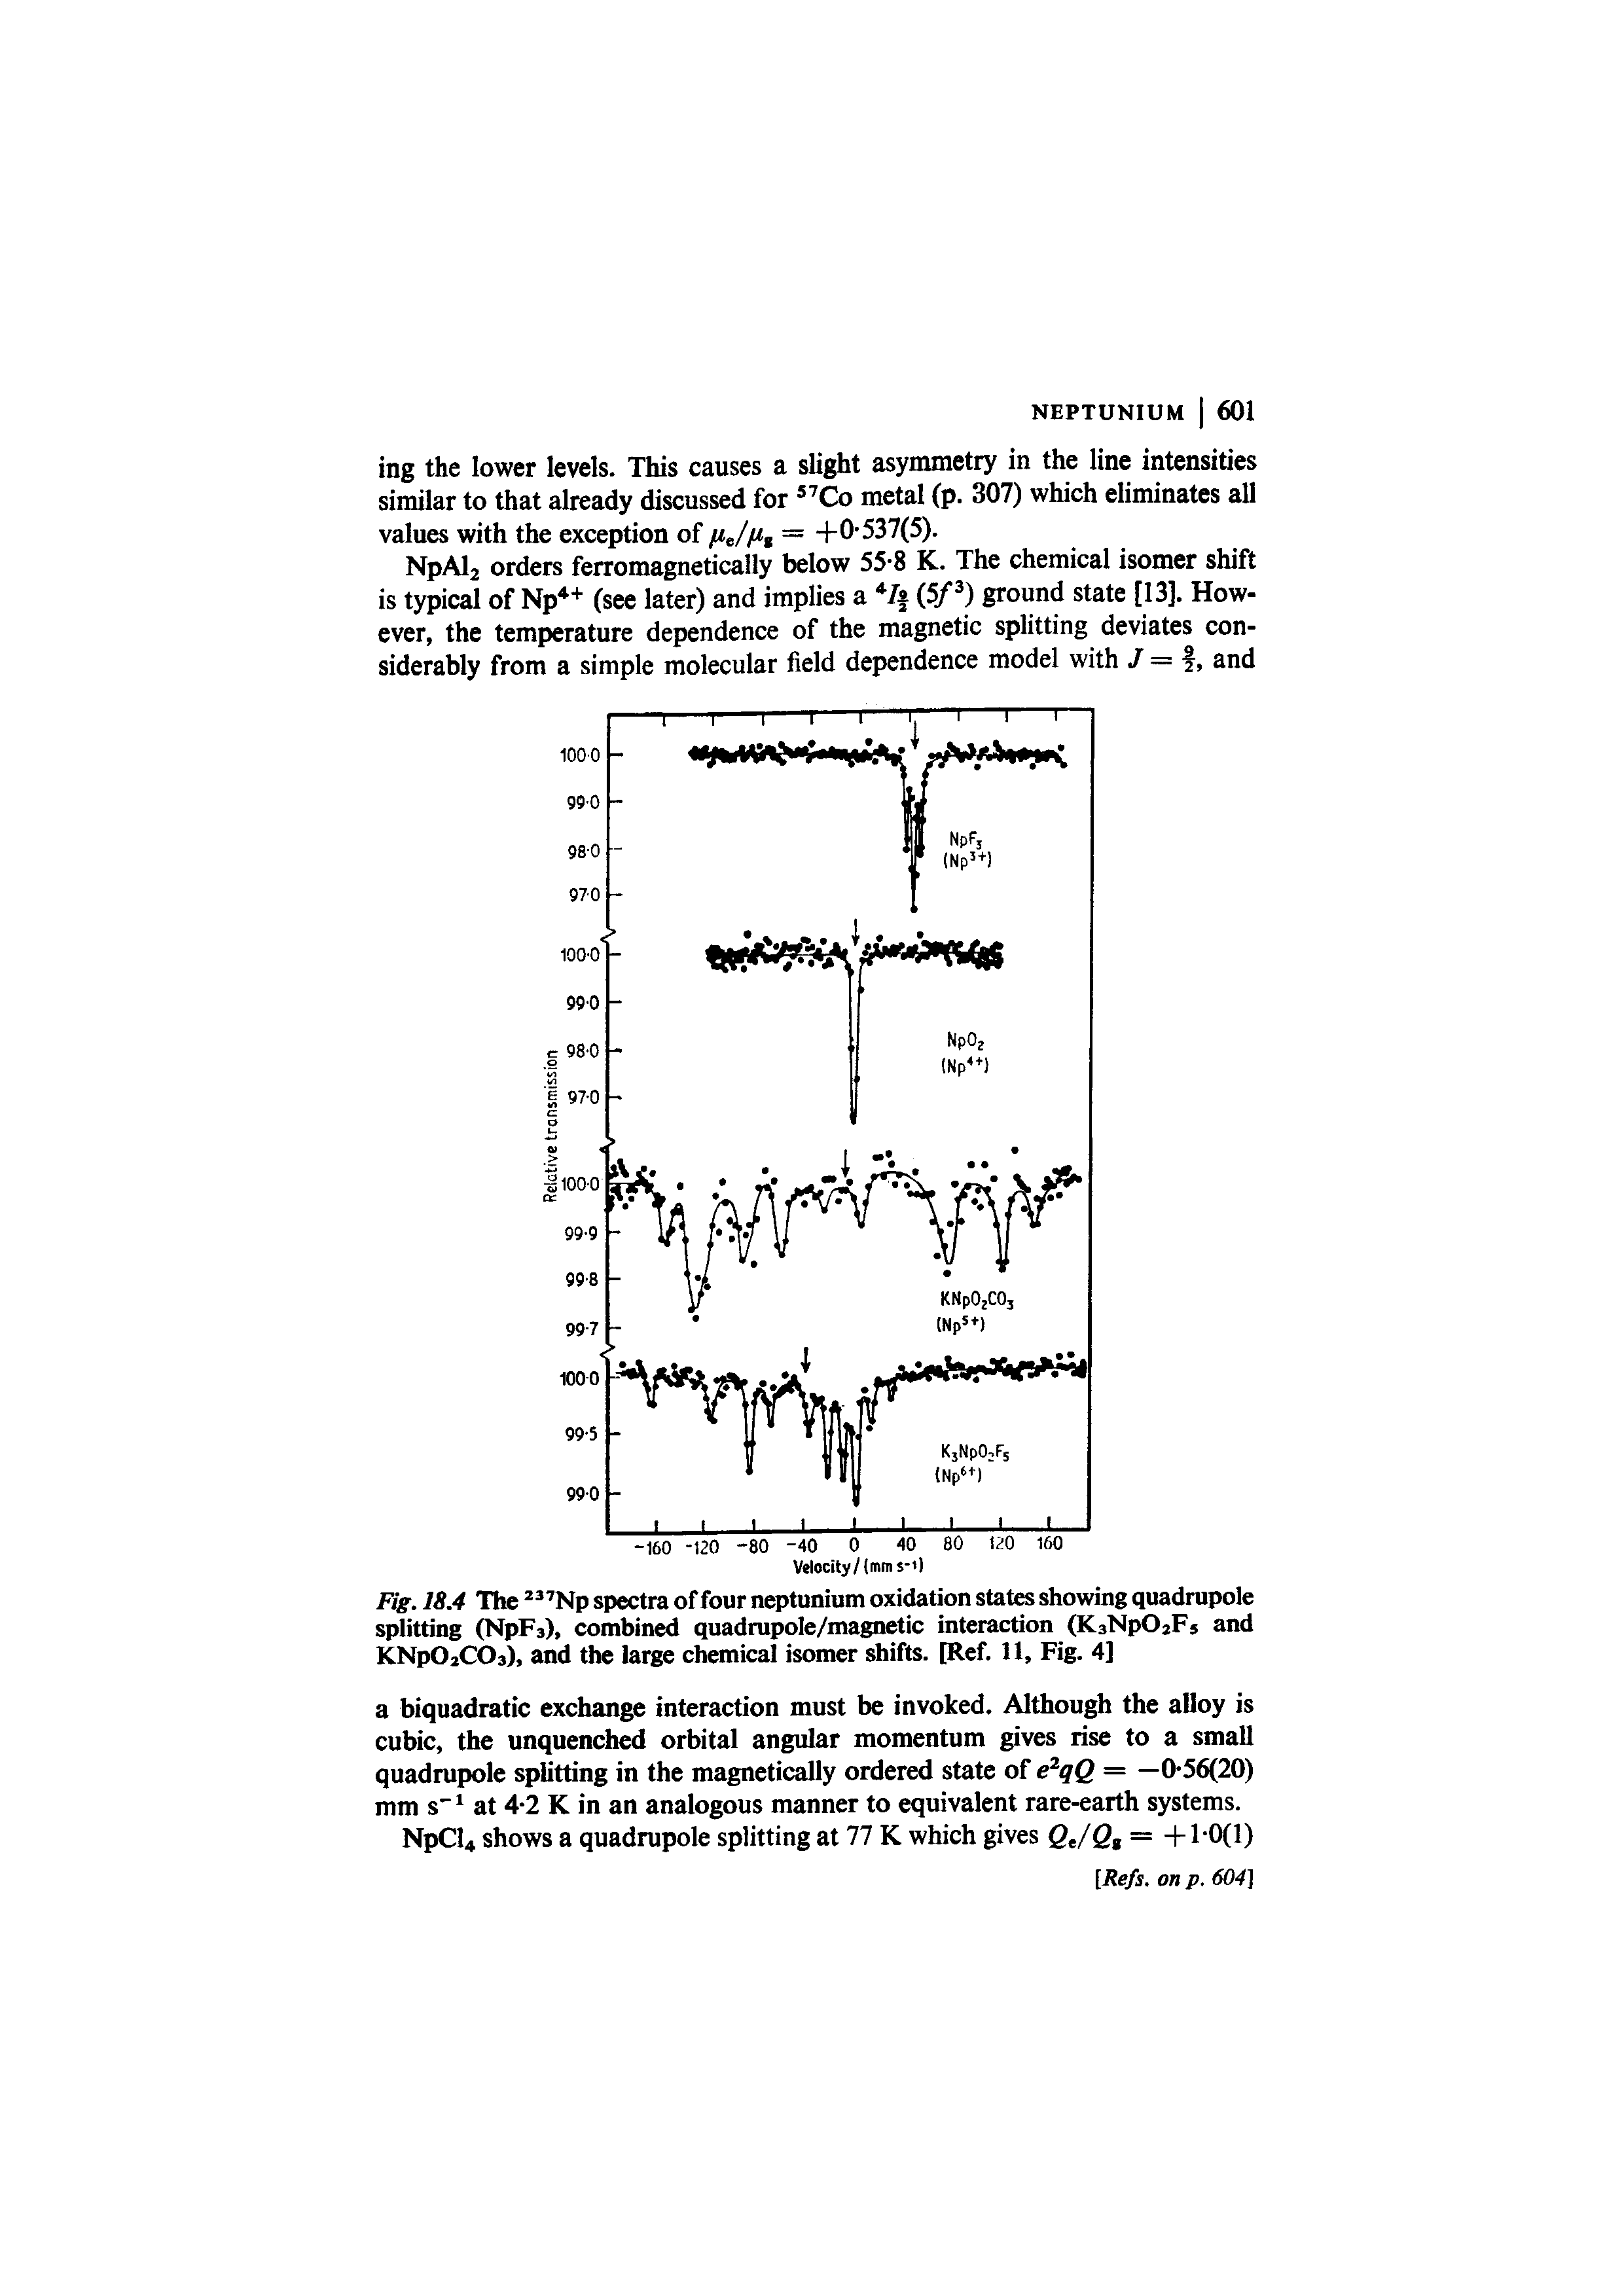 Fig. 18.4 The spectra of four neptunium oxidation states showing quadrupole...